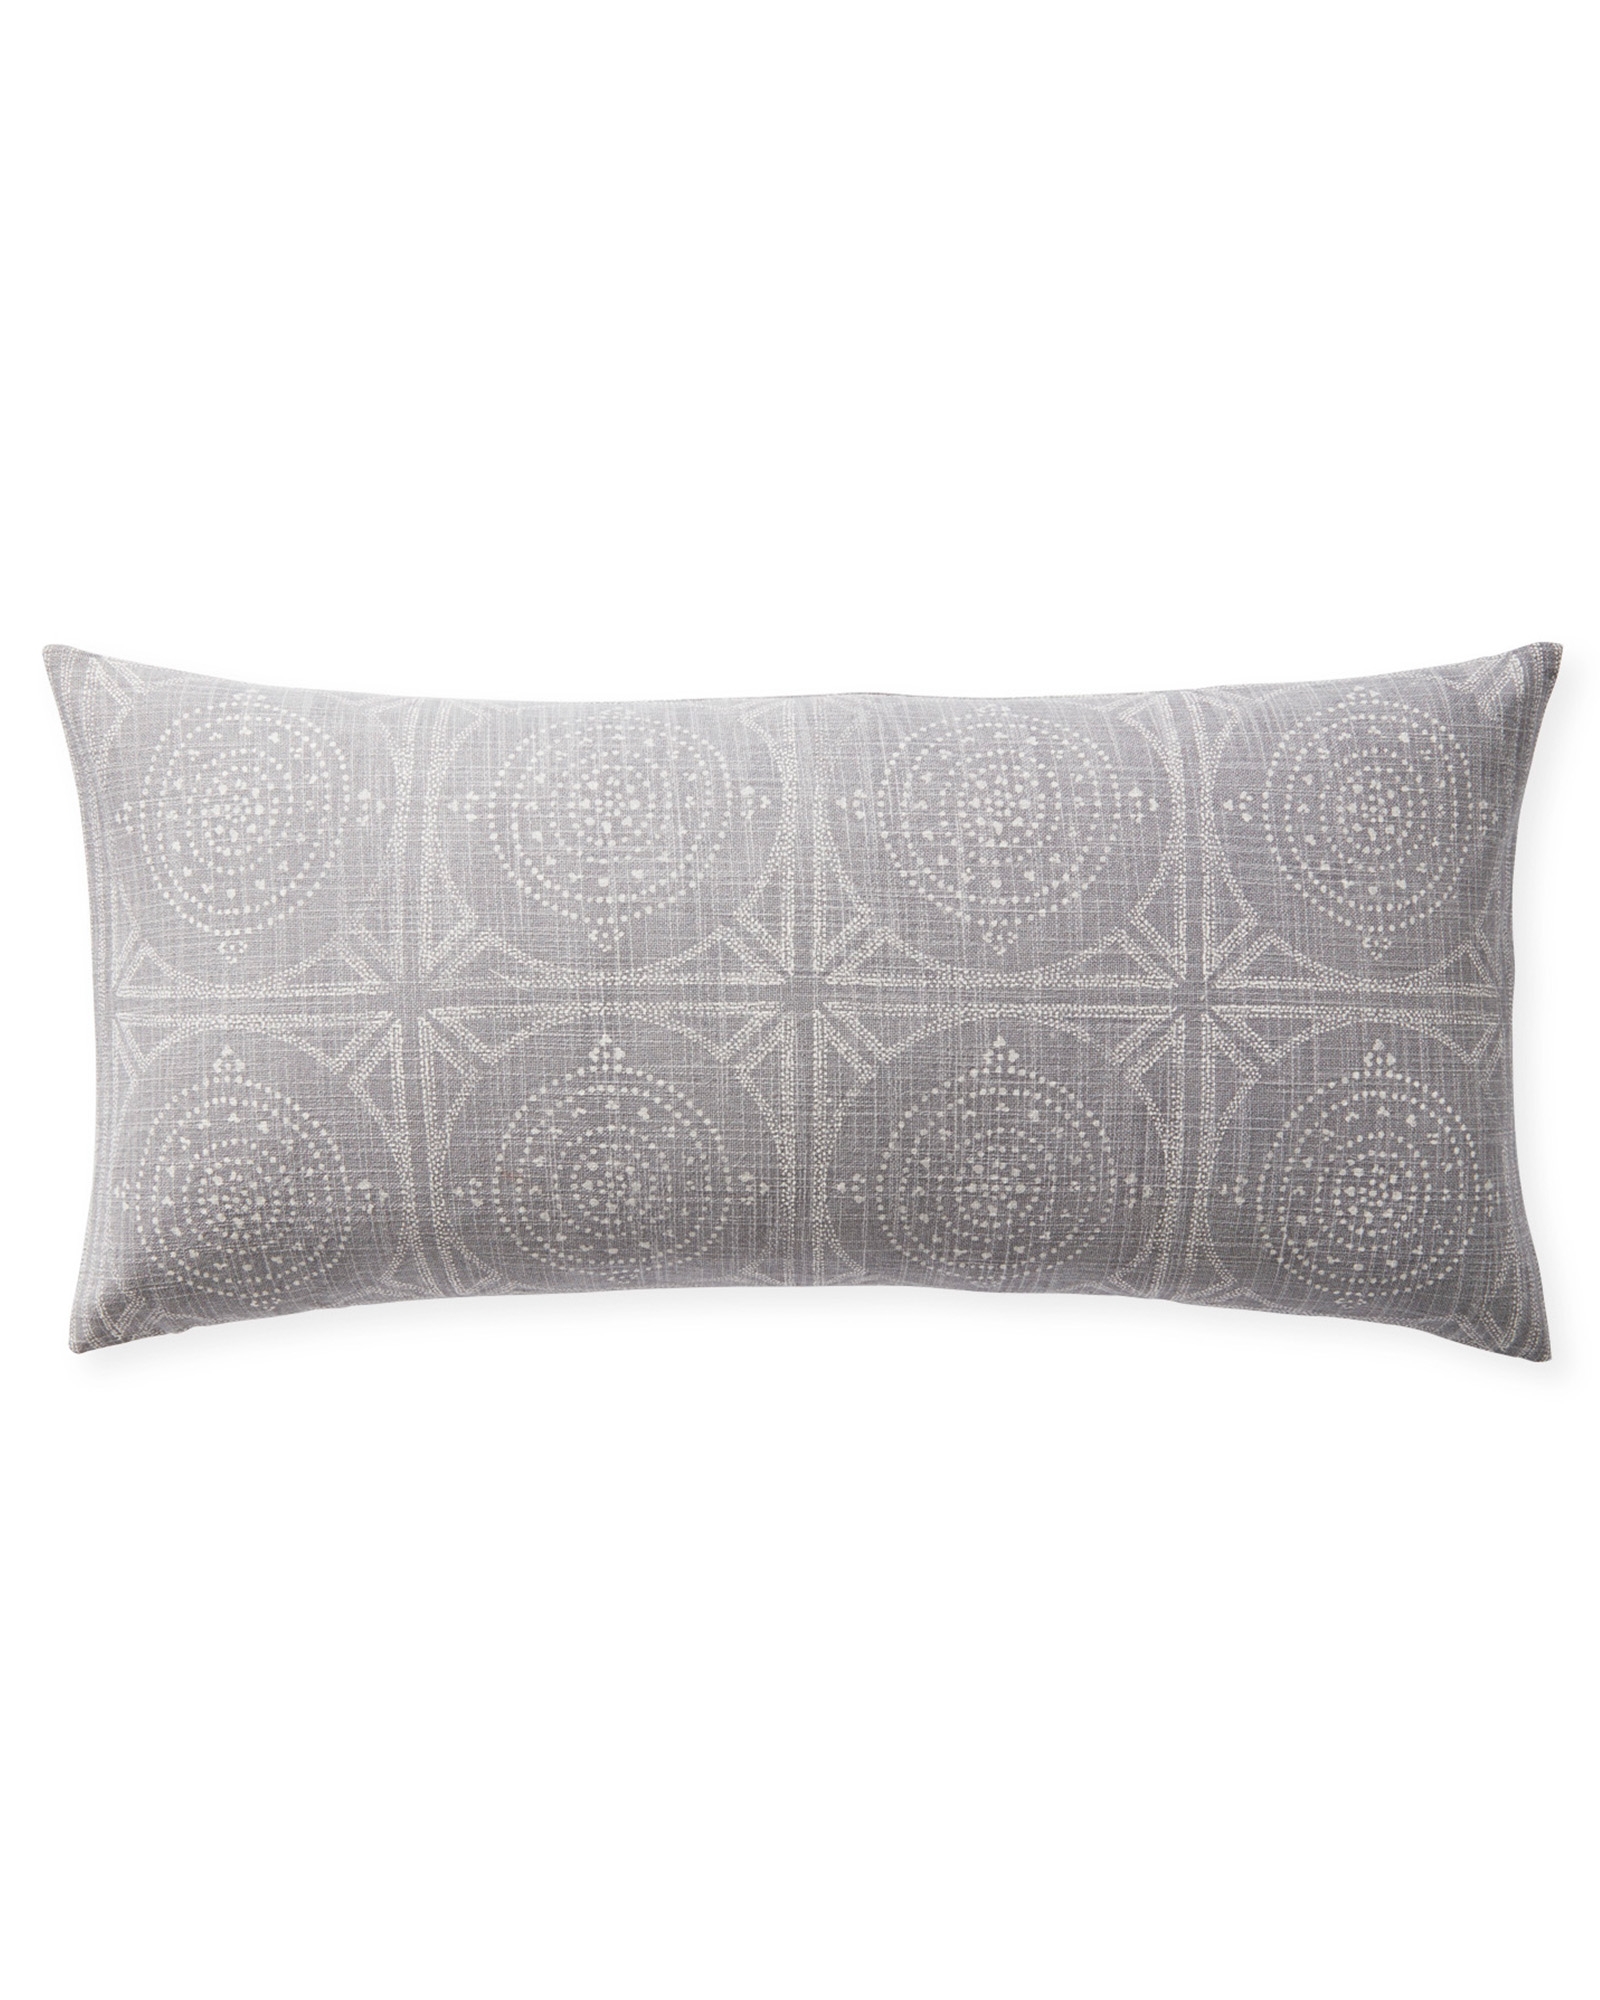 Camille Mosaic Lumbar 14 x 30" Pillow Cover - Smoke - Insert sold separately - Image 0